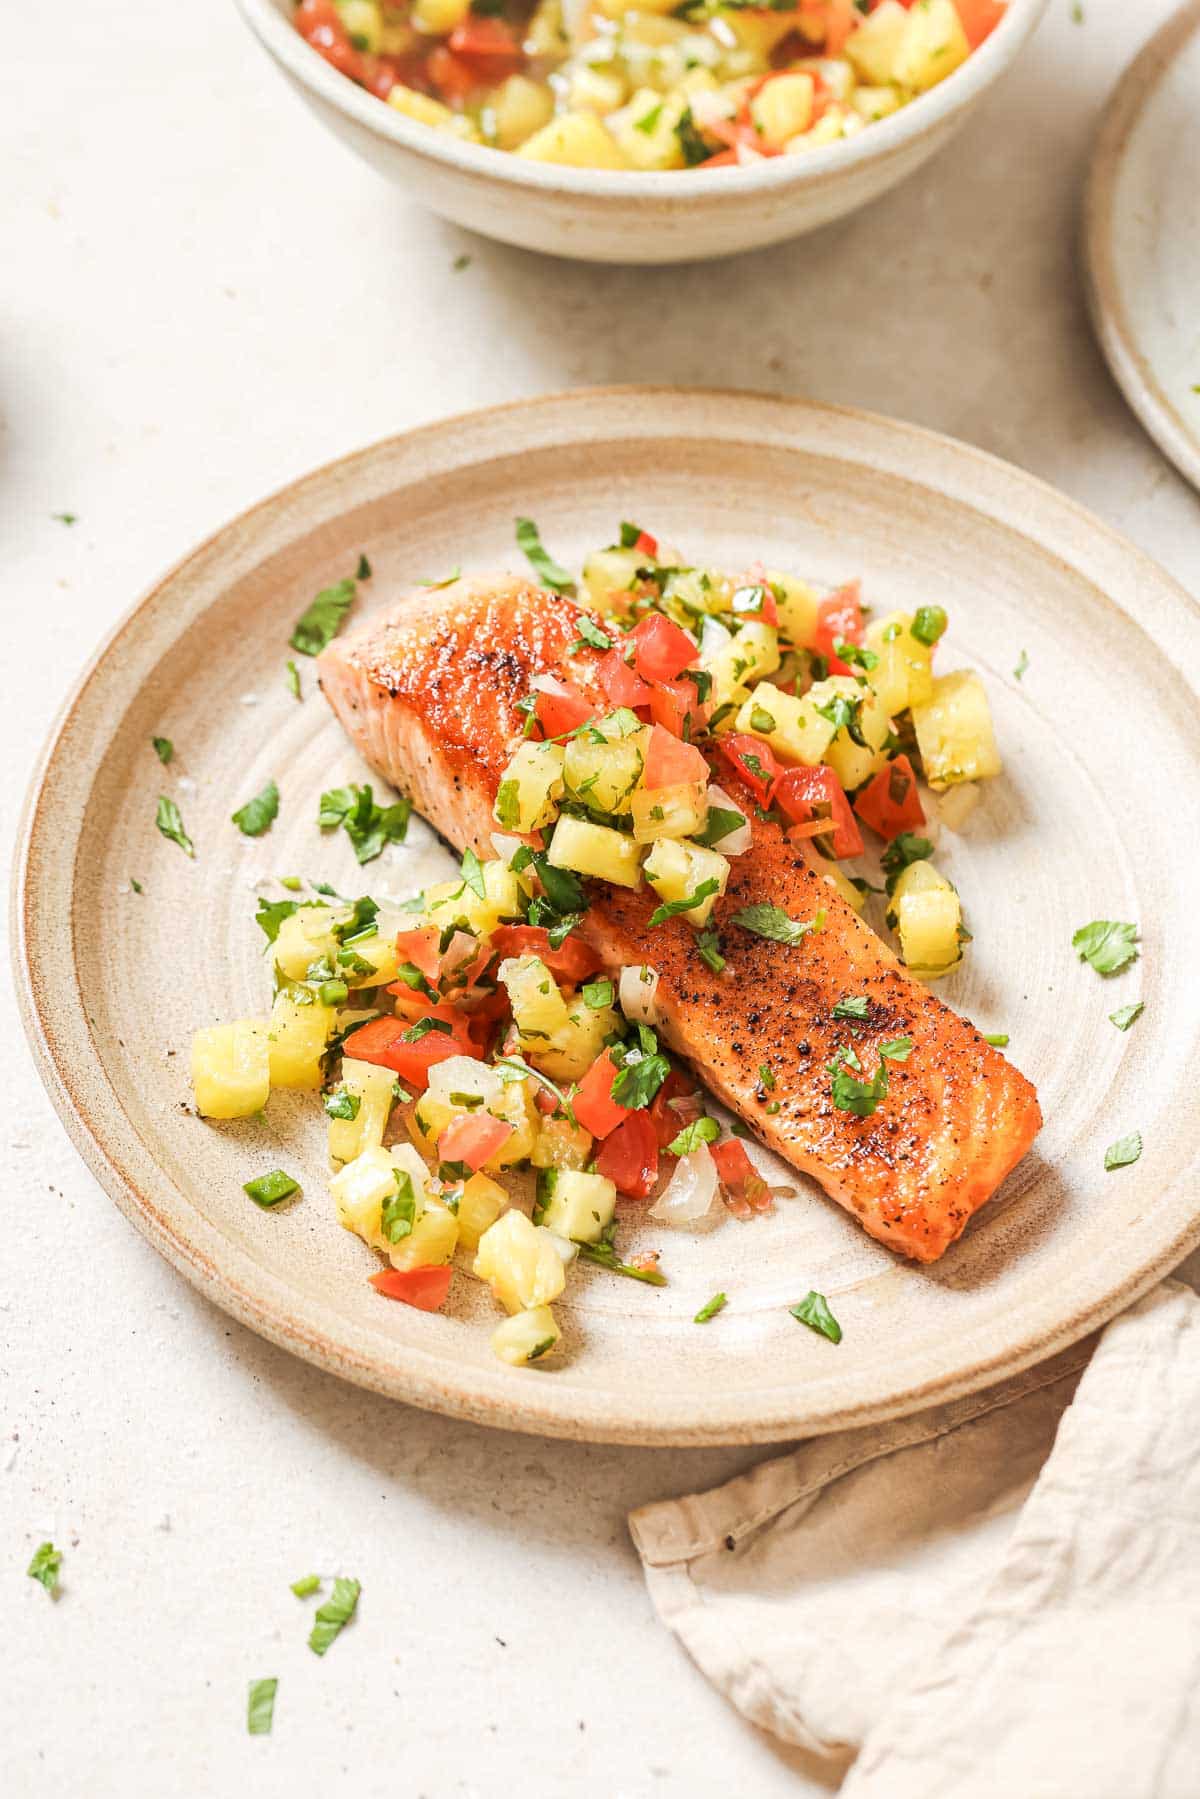 A plate with salmon and pineapple salsa.